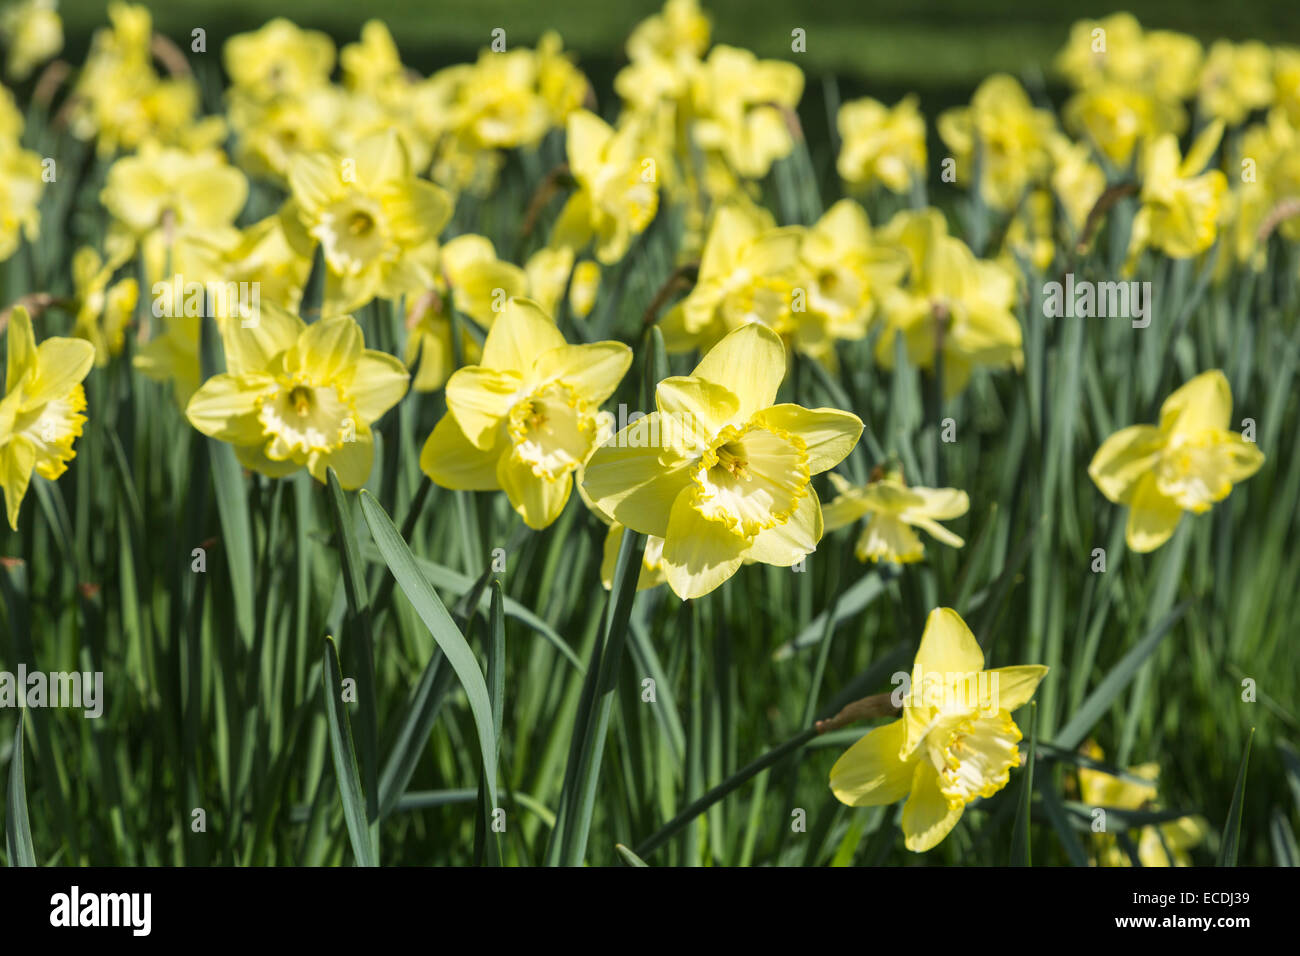 Close up of a group of Narcissus 'Saint Patrick's Day', a large cupped spring flowering daffodil with lemon yellow petals Stock Photo